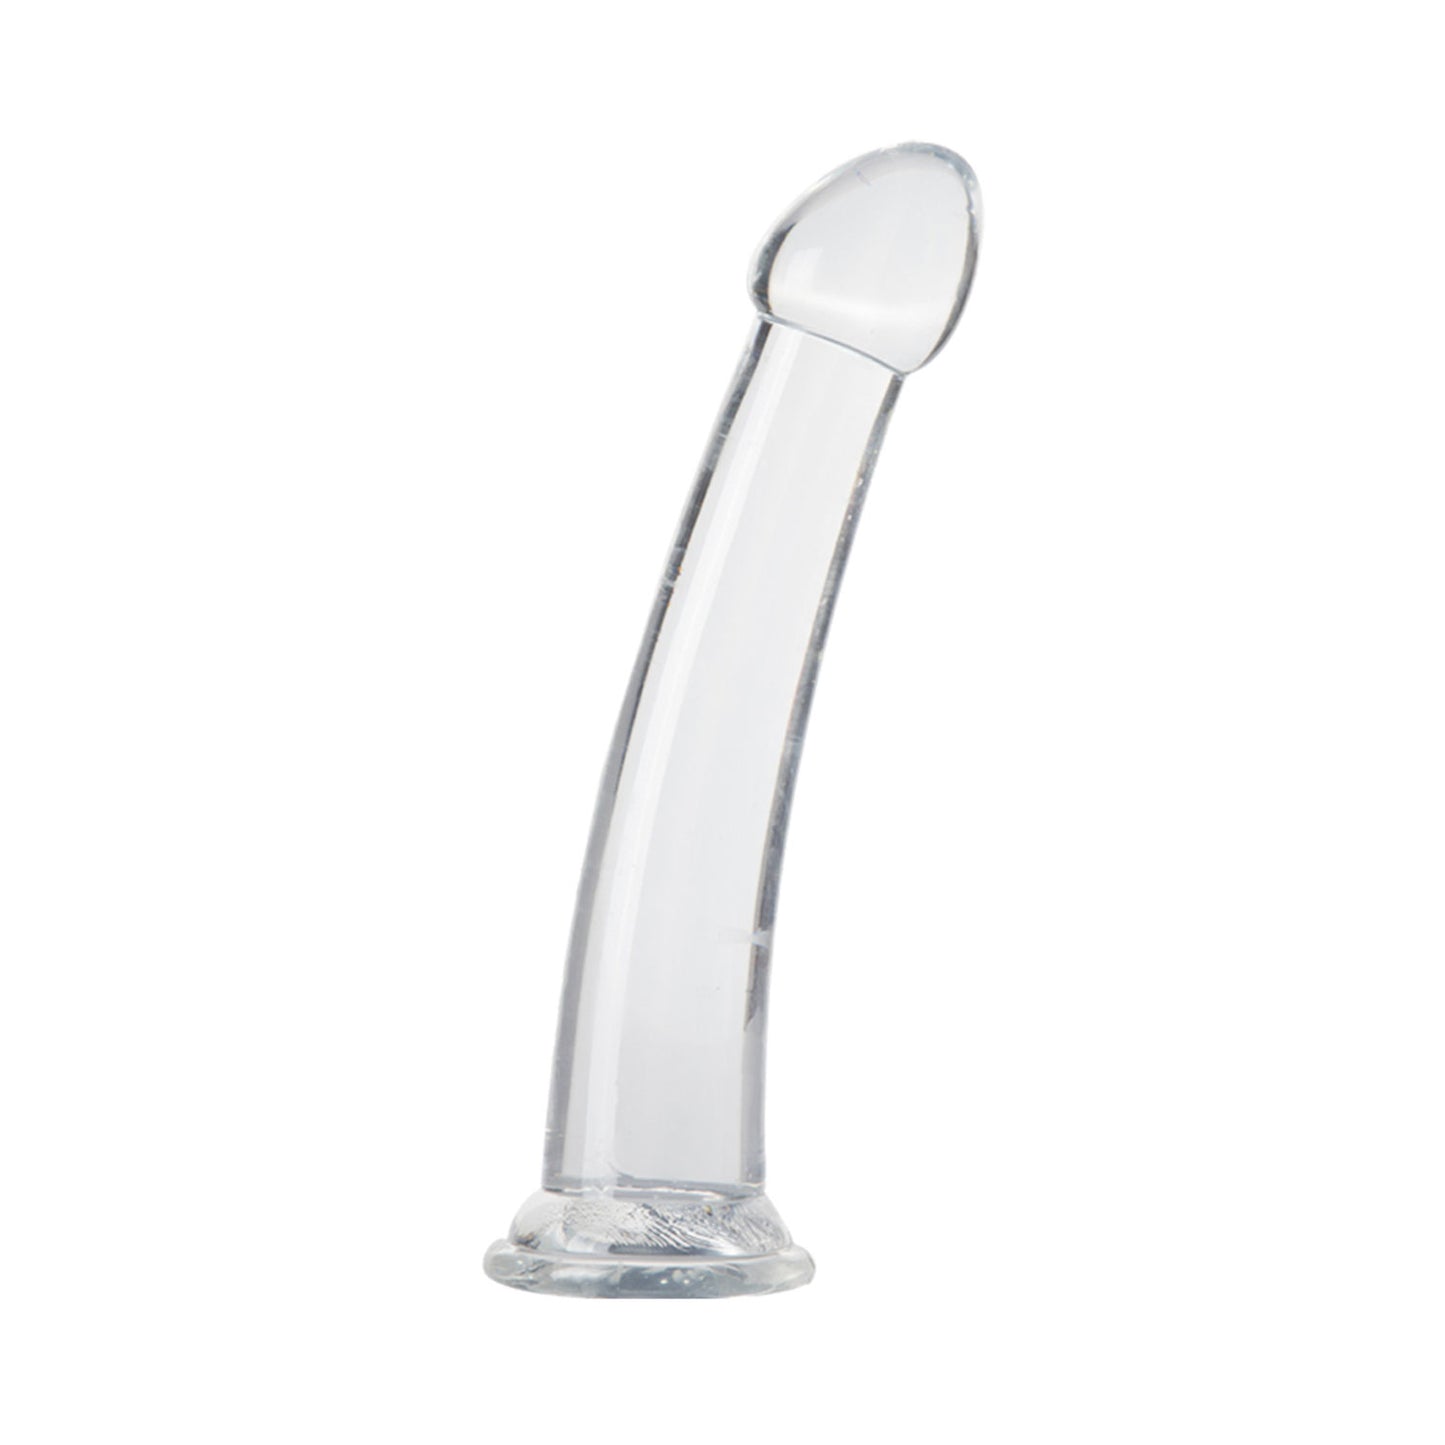 The Horny Company - No Frills Dildo 17cm x 3.3cm Smooth Suction Cup Dong Clear